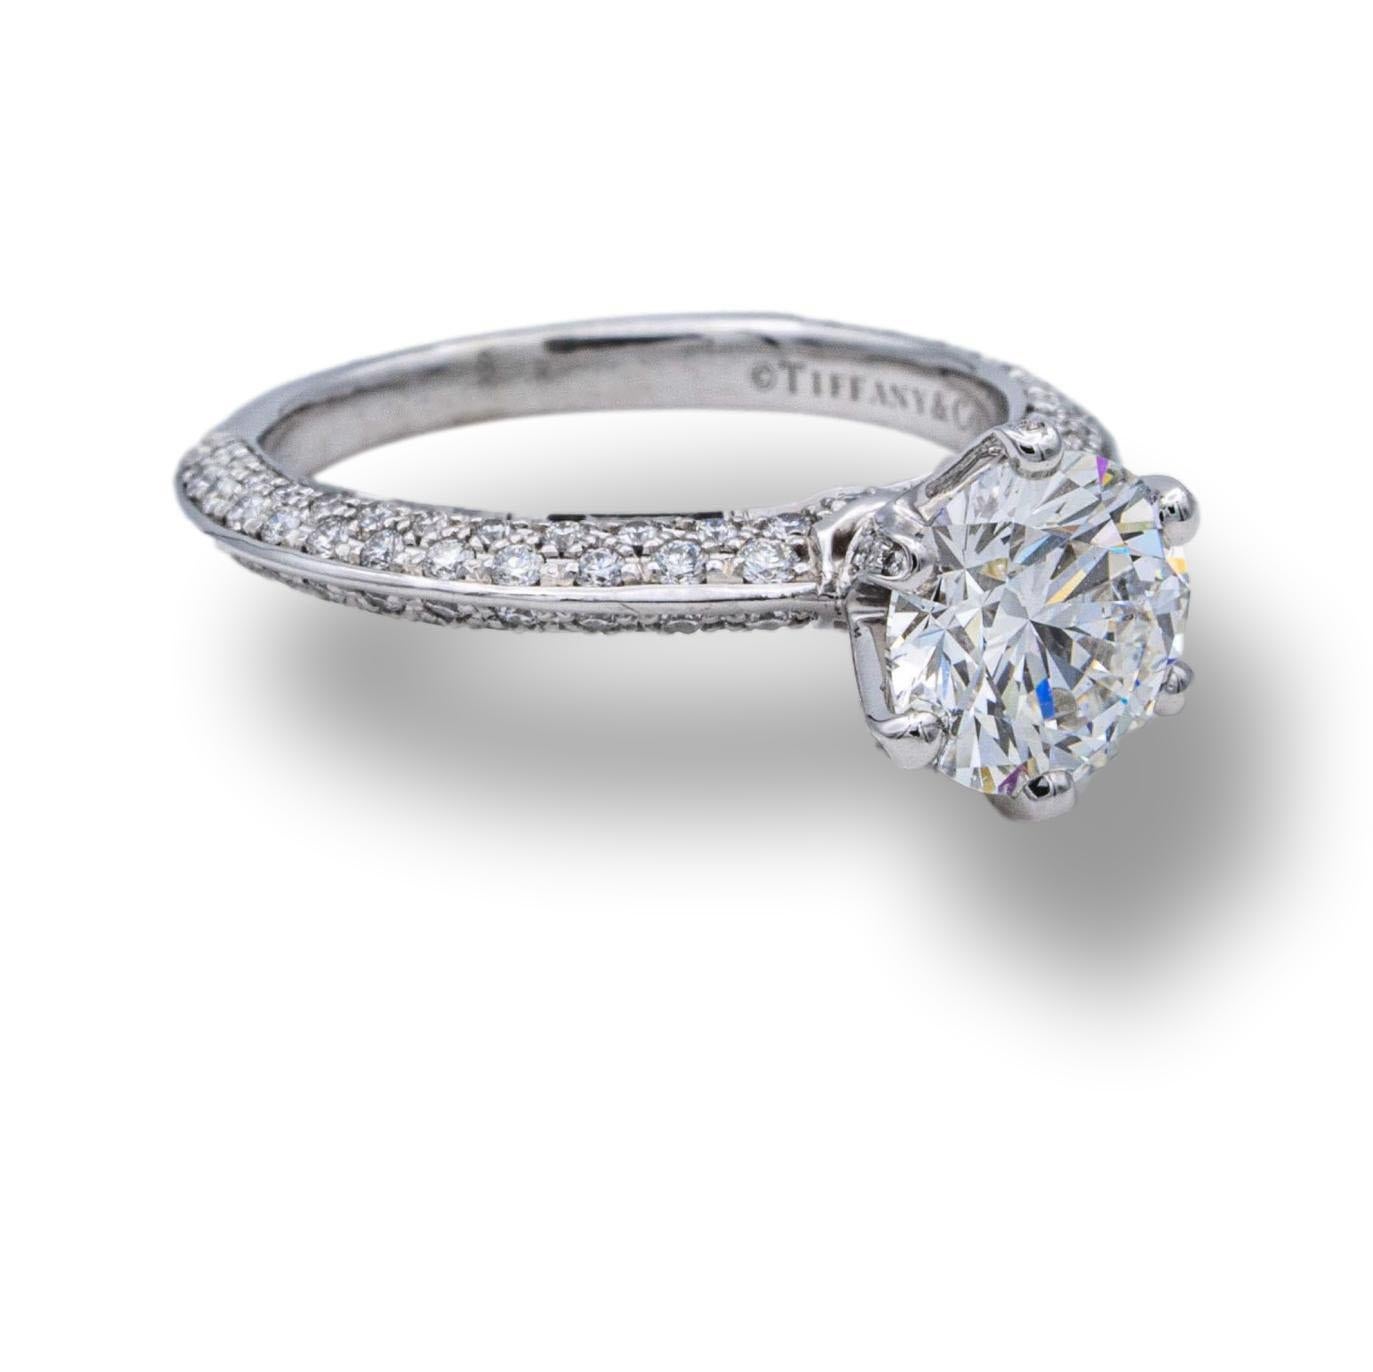 This exquisite Tiffany & Co platinum engagement ring features an excellent cut round diamond weighing 1.02 cts with pave set diamonds weighing 0.37 cts that sparkle brilliantly even in the darkest of corners.

RING SPECIFICATIONS:
Brand: Tiffany &